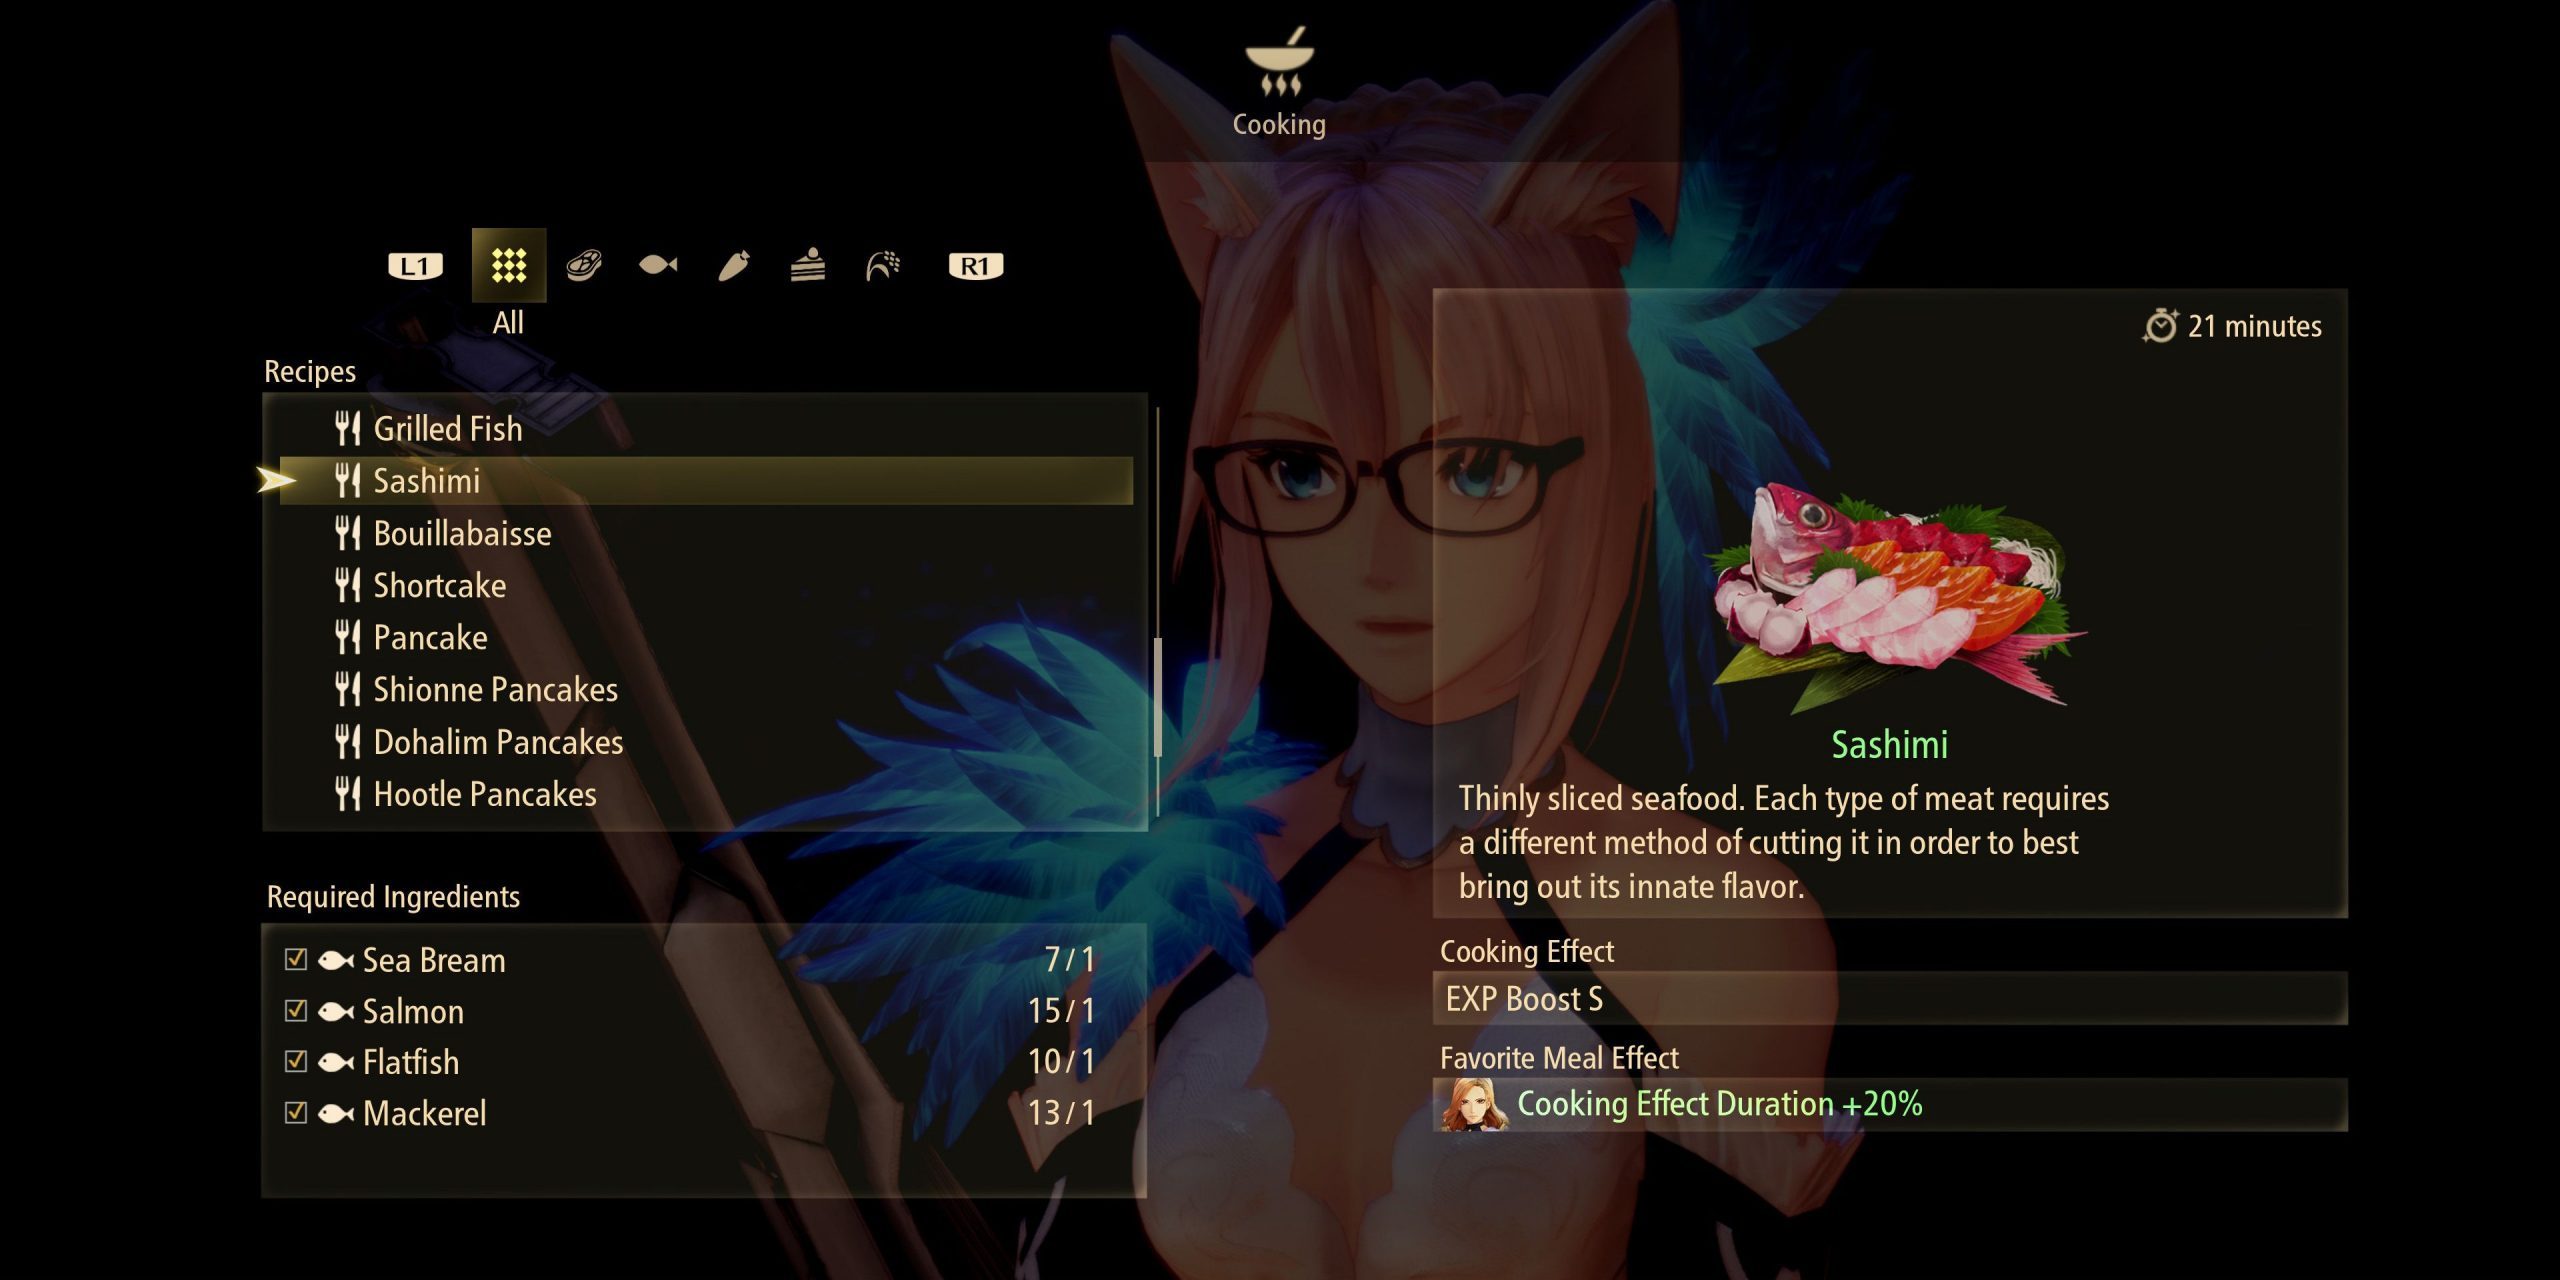 tales-of-arise-cooking-recipe-locations-41-sashimi-4866543